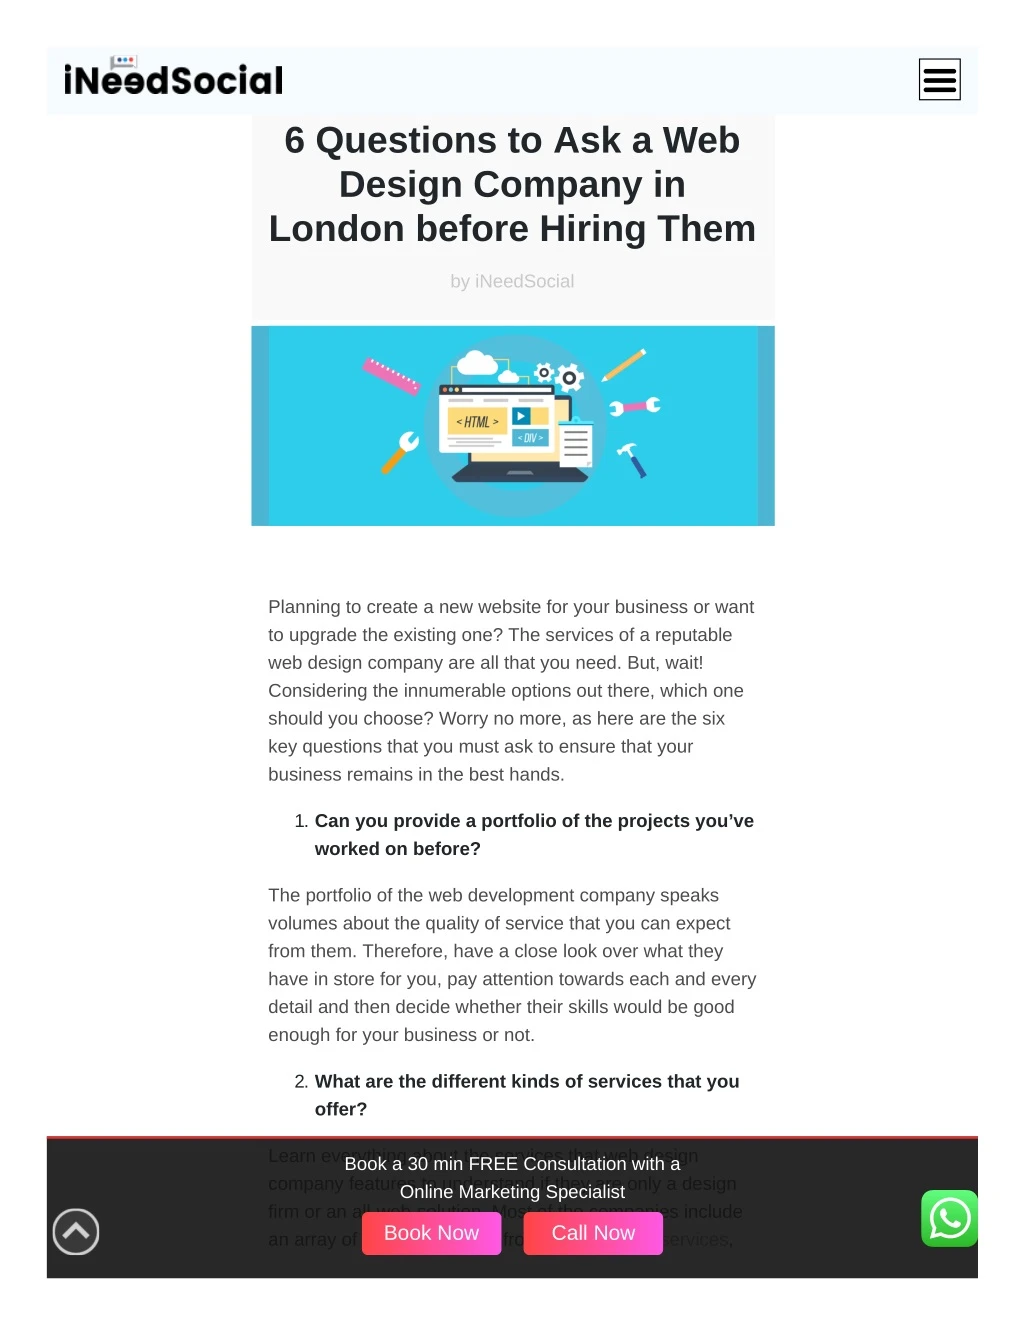 6 questions to ask a web design company in london